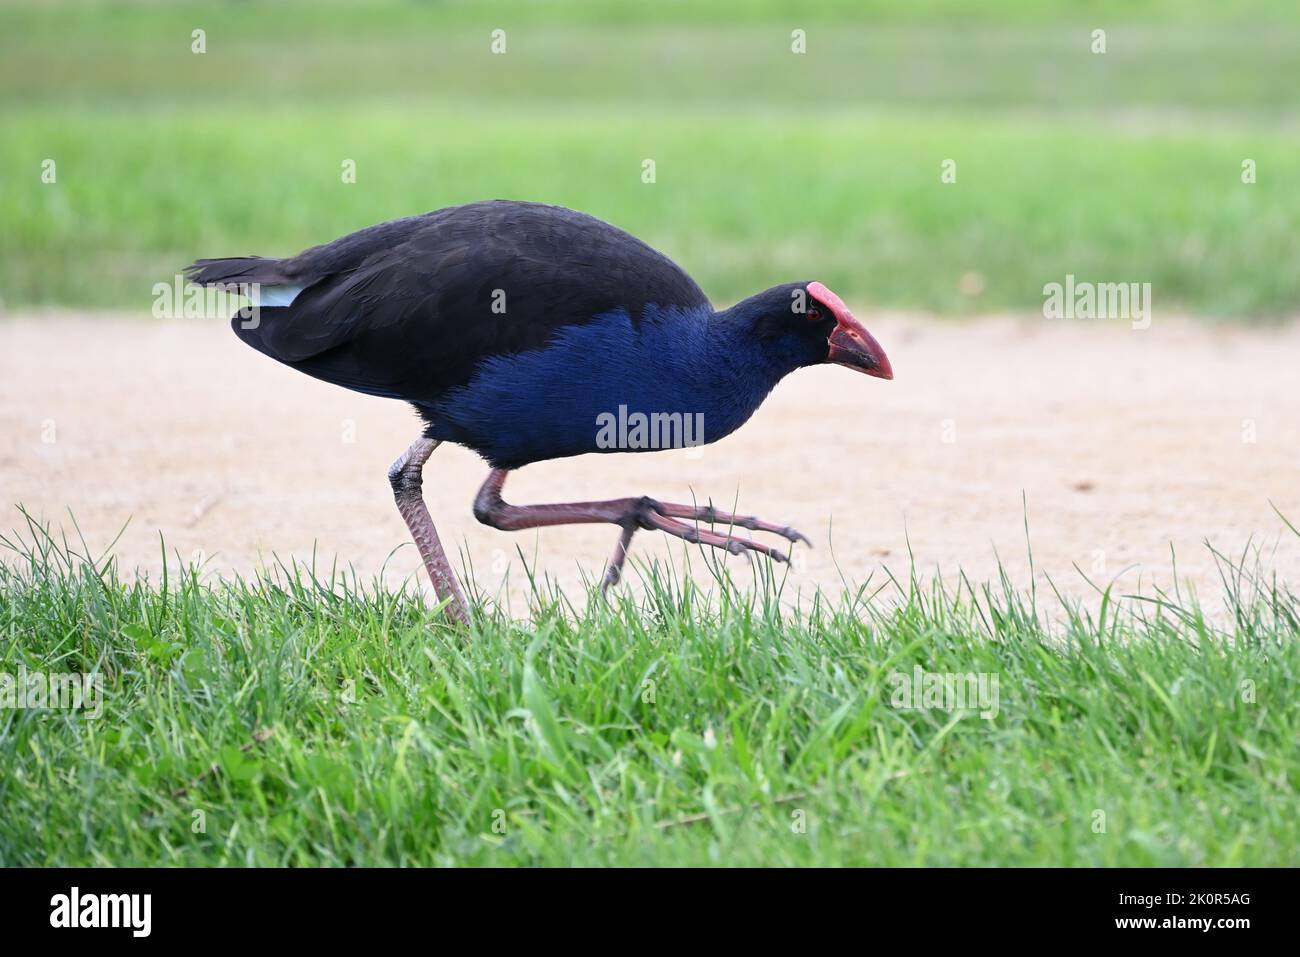 Side view of a purple swamphen, or pukeko, in mid-stride as it travels on grass running alongside a path in a park Stock Photo